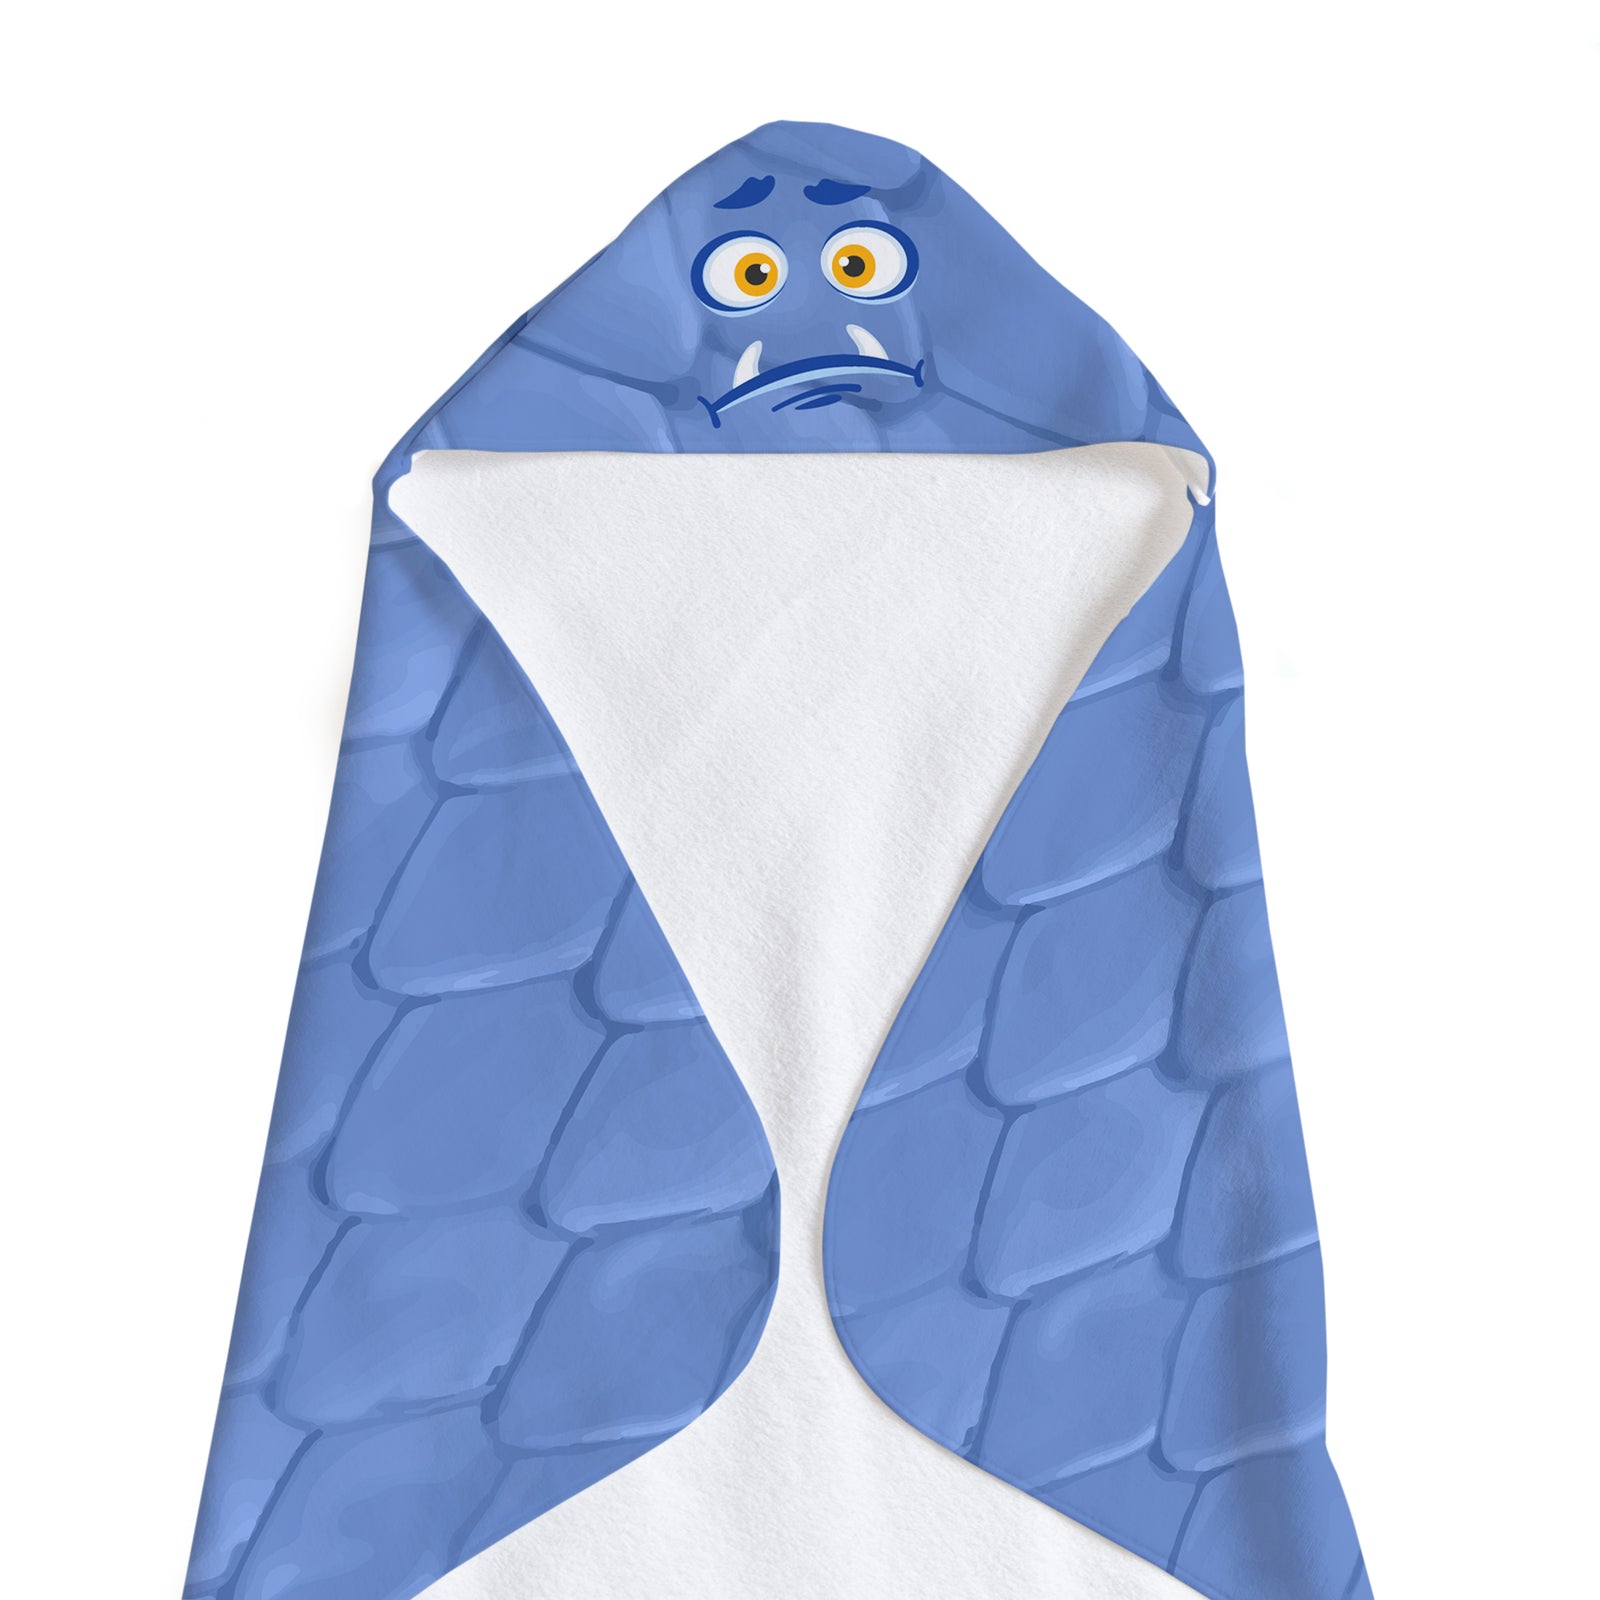 Buy this Slate Blue Monster Soft and Absorbent Hooded Baby Towel